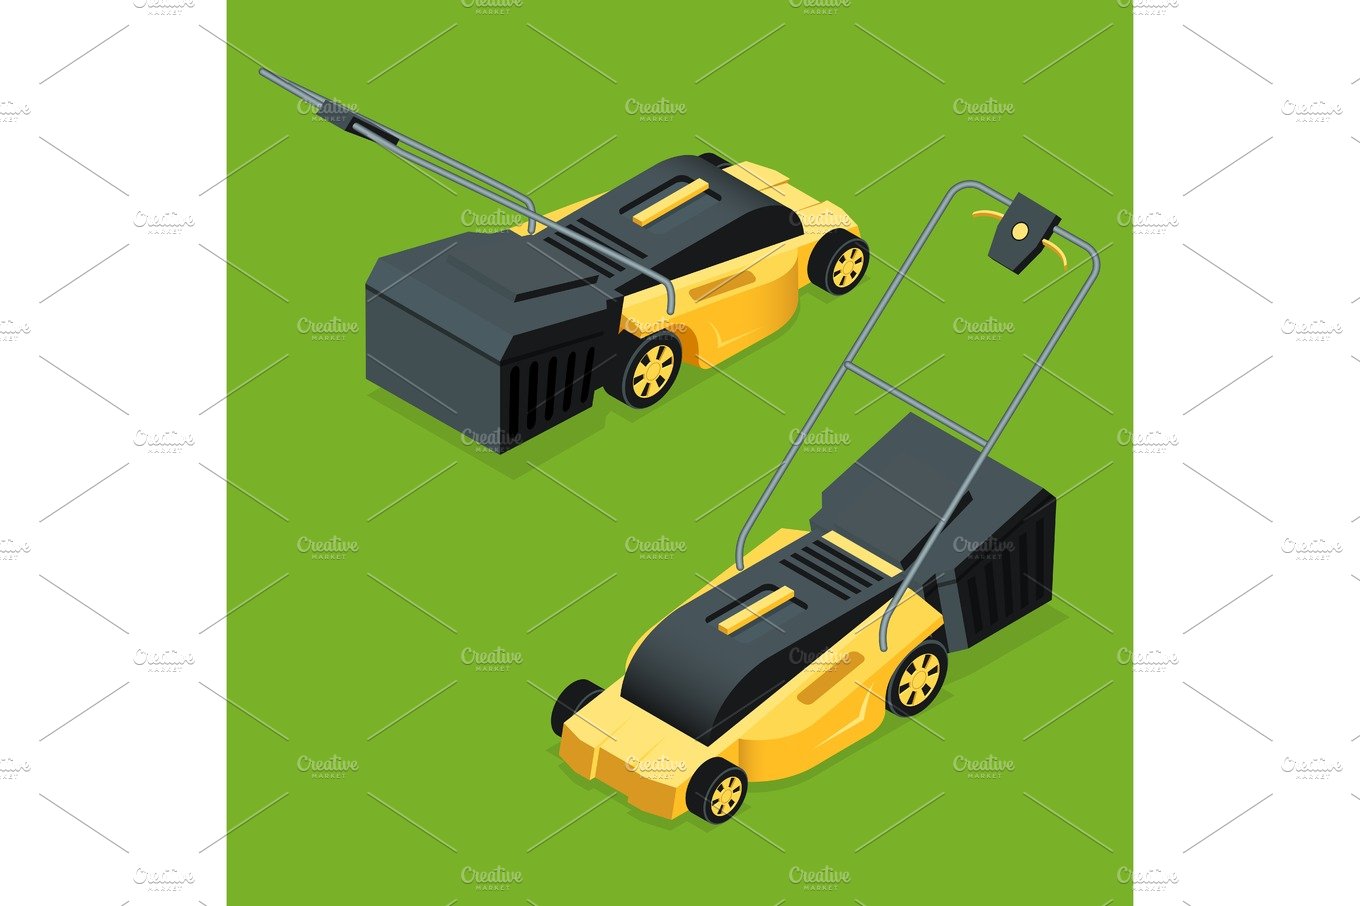 Electric yellow lawn mower in summertime. Lawn grass service concept. Isome... cover image.